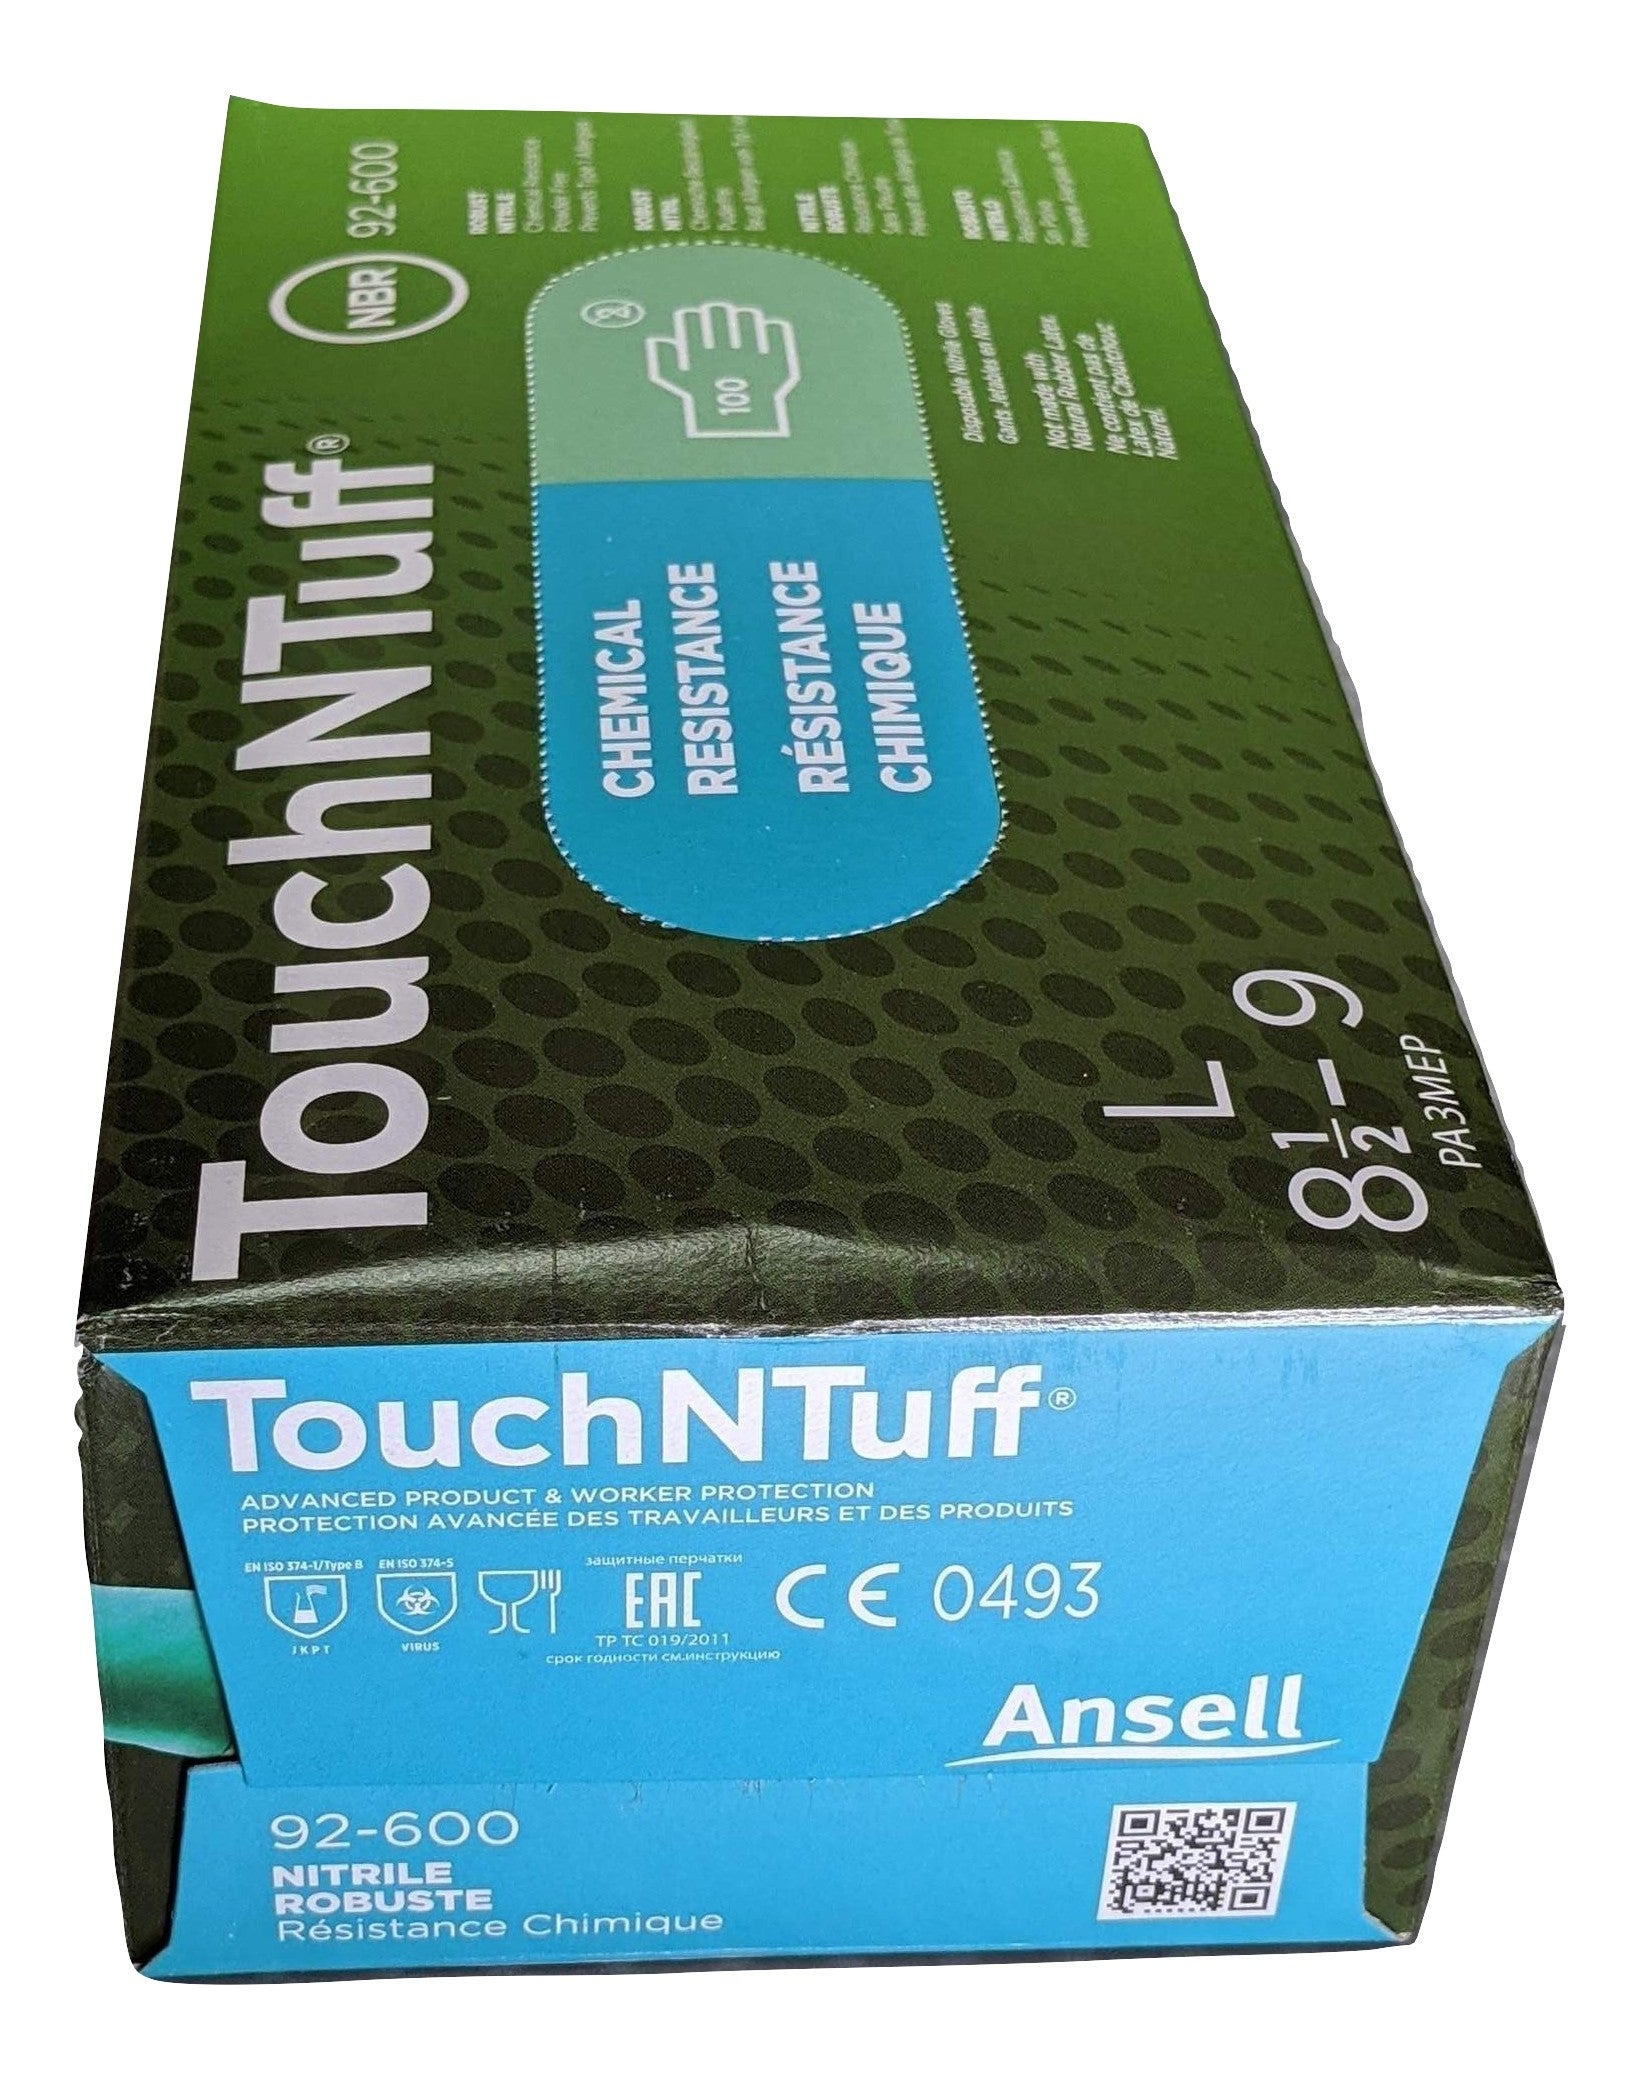 ANSELL TouchNTuff 92-600-L Chemical Resistant Nitrile powder free disposable gloves, Size LARGE - Case of 1000 (10 Boxes)